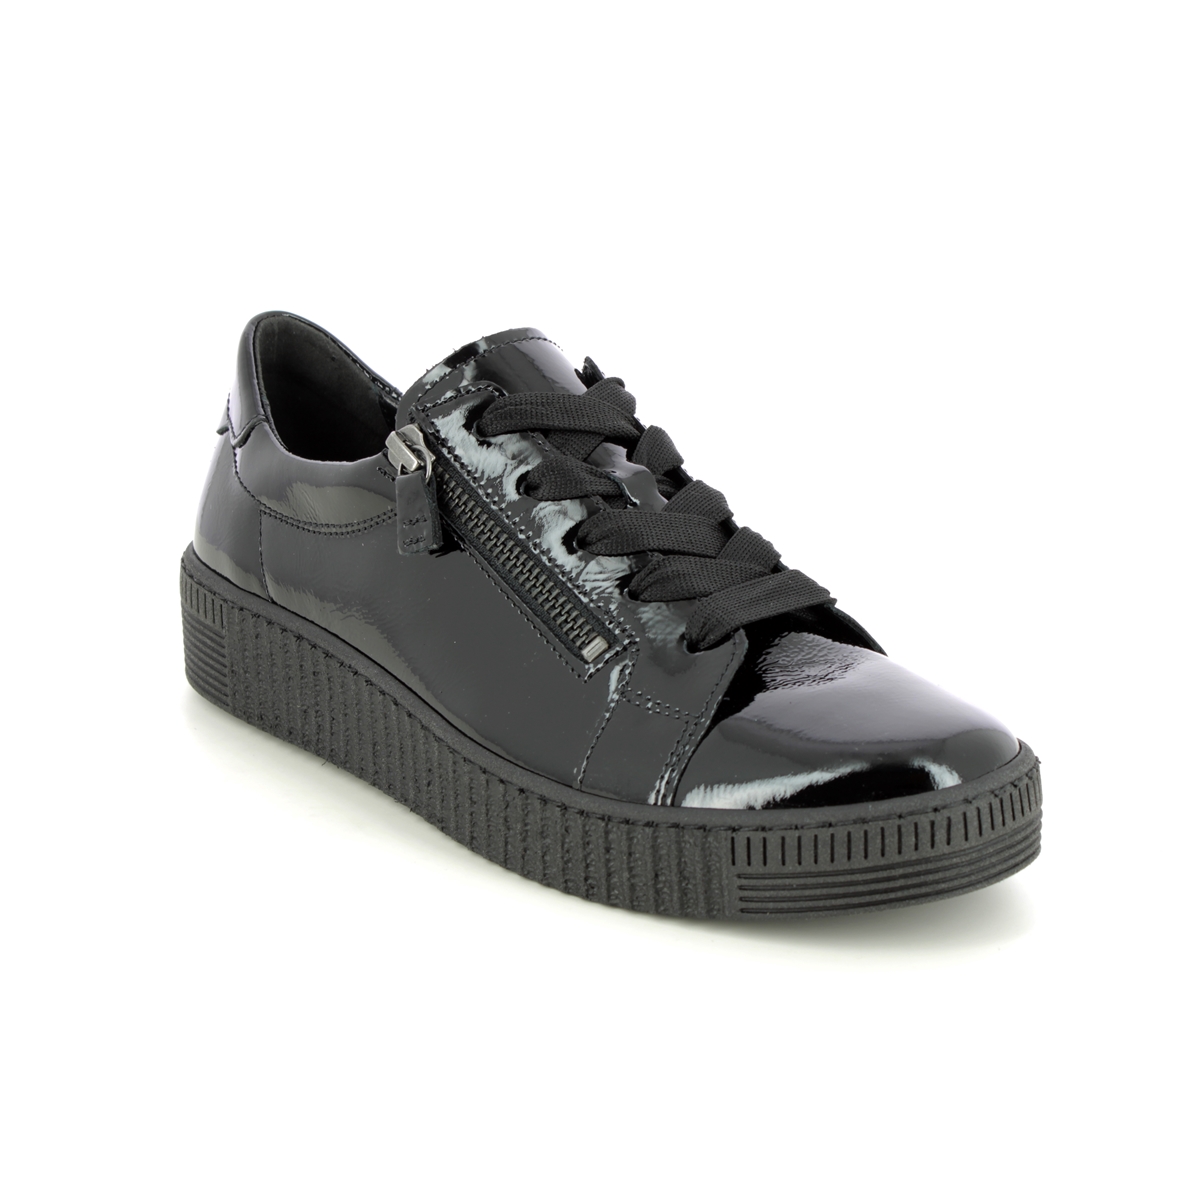 Gabor Wisdom Black patent Womens trainers 93.334.97 in a Plain Leather in Size 6.5